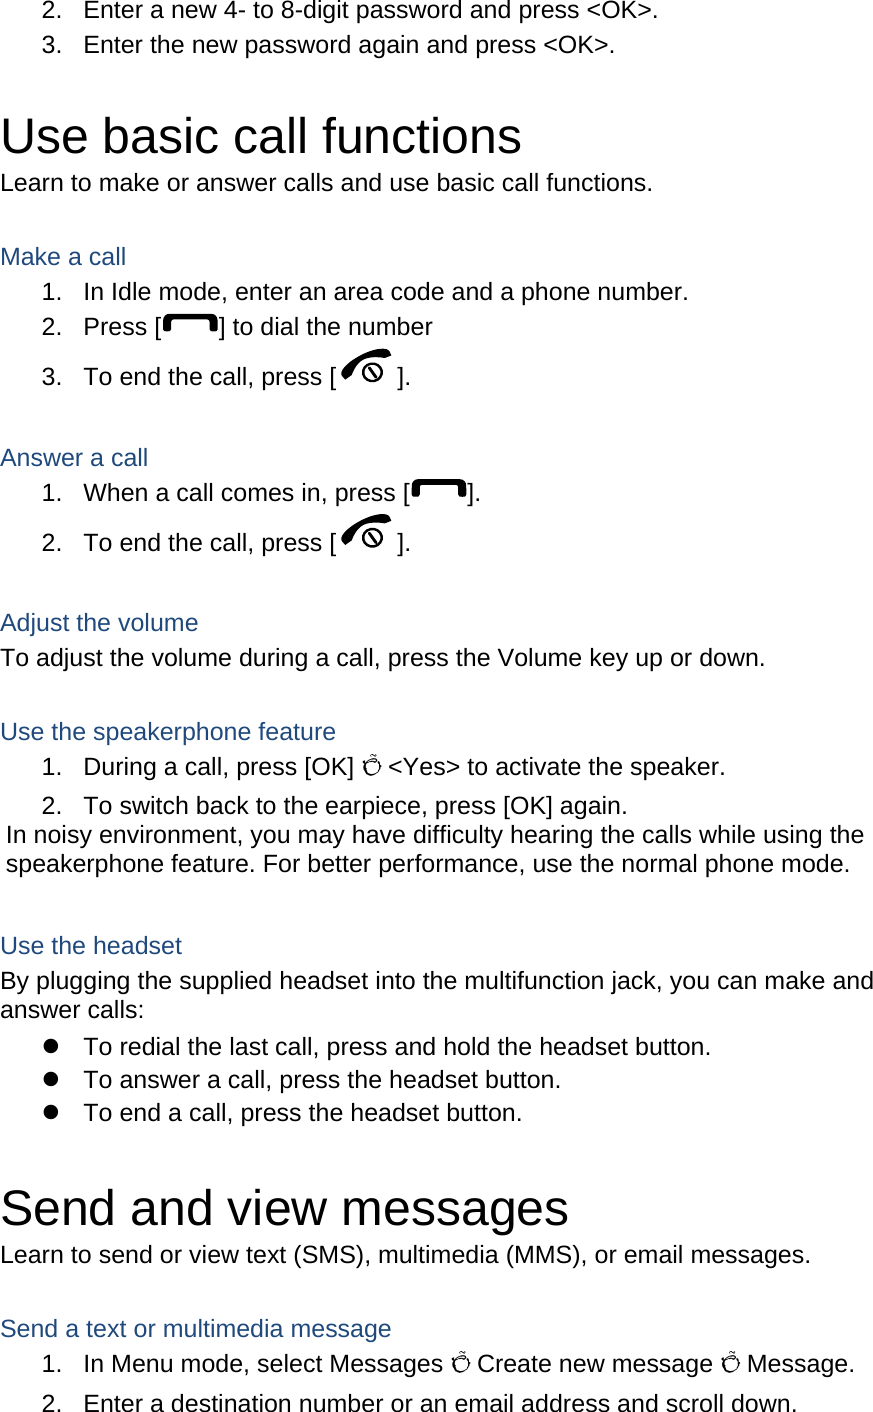   2.  Enter a new 4- to 8-digit password and press &lt;OK&gt;. 3.  Enter the new password again and press &lt;OK&gt;.  Use basic call functions Learn to make or answer calls and use basic call functions.  Make a call 1.  In Idle mode, enter an area code and a phone number. 2. Press [ ] to dial the number 3.  To end the call, press [ ].   Answer a call 1.  When a call comes in, press [ ]. 2.  To end the call, press [ ].  Adjust the volume To adjust the volume during a call, press the Volume key up or down.  Use the speakerphone feature 1.  During a call, press [OK] Õ &lt;Yes&gt; to activate the speaker. 2.  To switch back to the earpiece, press [OK] again. In noisy environment, you may have difficulty hearing the calls while using the speakerphone feature. For better performance, use the normal phone mode.  Use the headset By plugging the supplied headset into the multifunction jack, you can make and answer calls:   To redial the last call, press and hold the headset button.   To answer a call, press the headset button.   To end a call, press the headset button.  Send and view messages Learn to send or view text (SMS), multimedia (MMS), or email messages.  Send a text or multimedia message 1.  In Menu mode, select Messages Õ Create new message Õ Message. 2.  Enter a destination number or an email address and scroll down. 